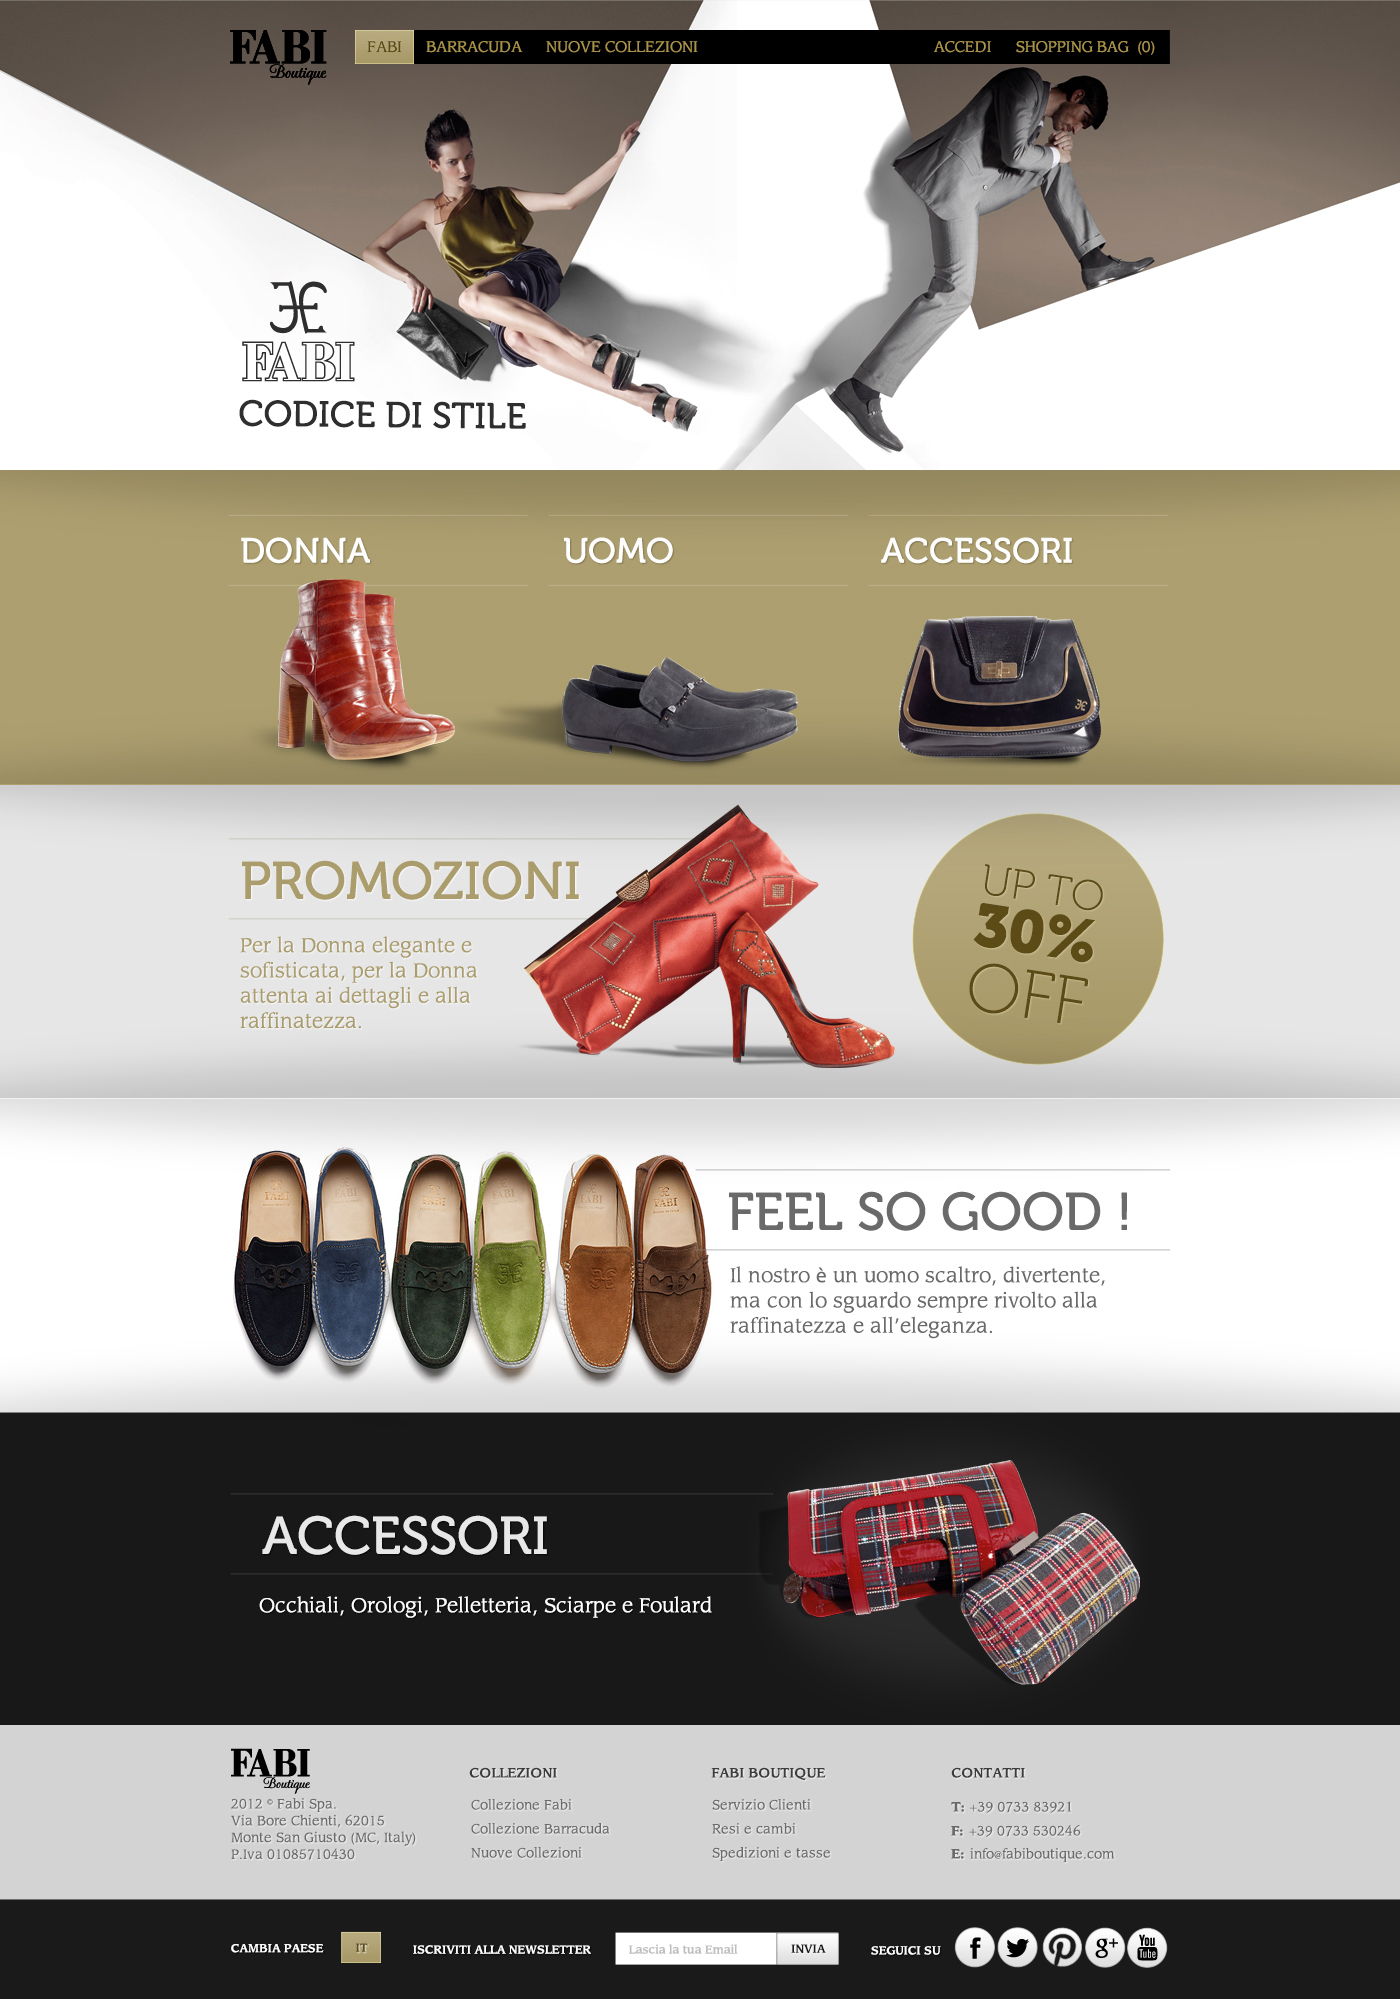 shoes boutique fabiboutique luxury Webdesign straypeople interactiondesign